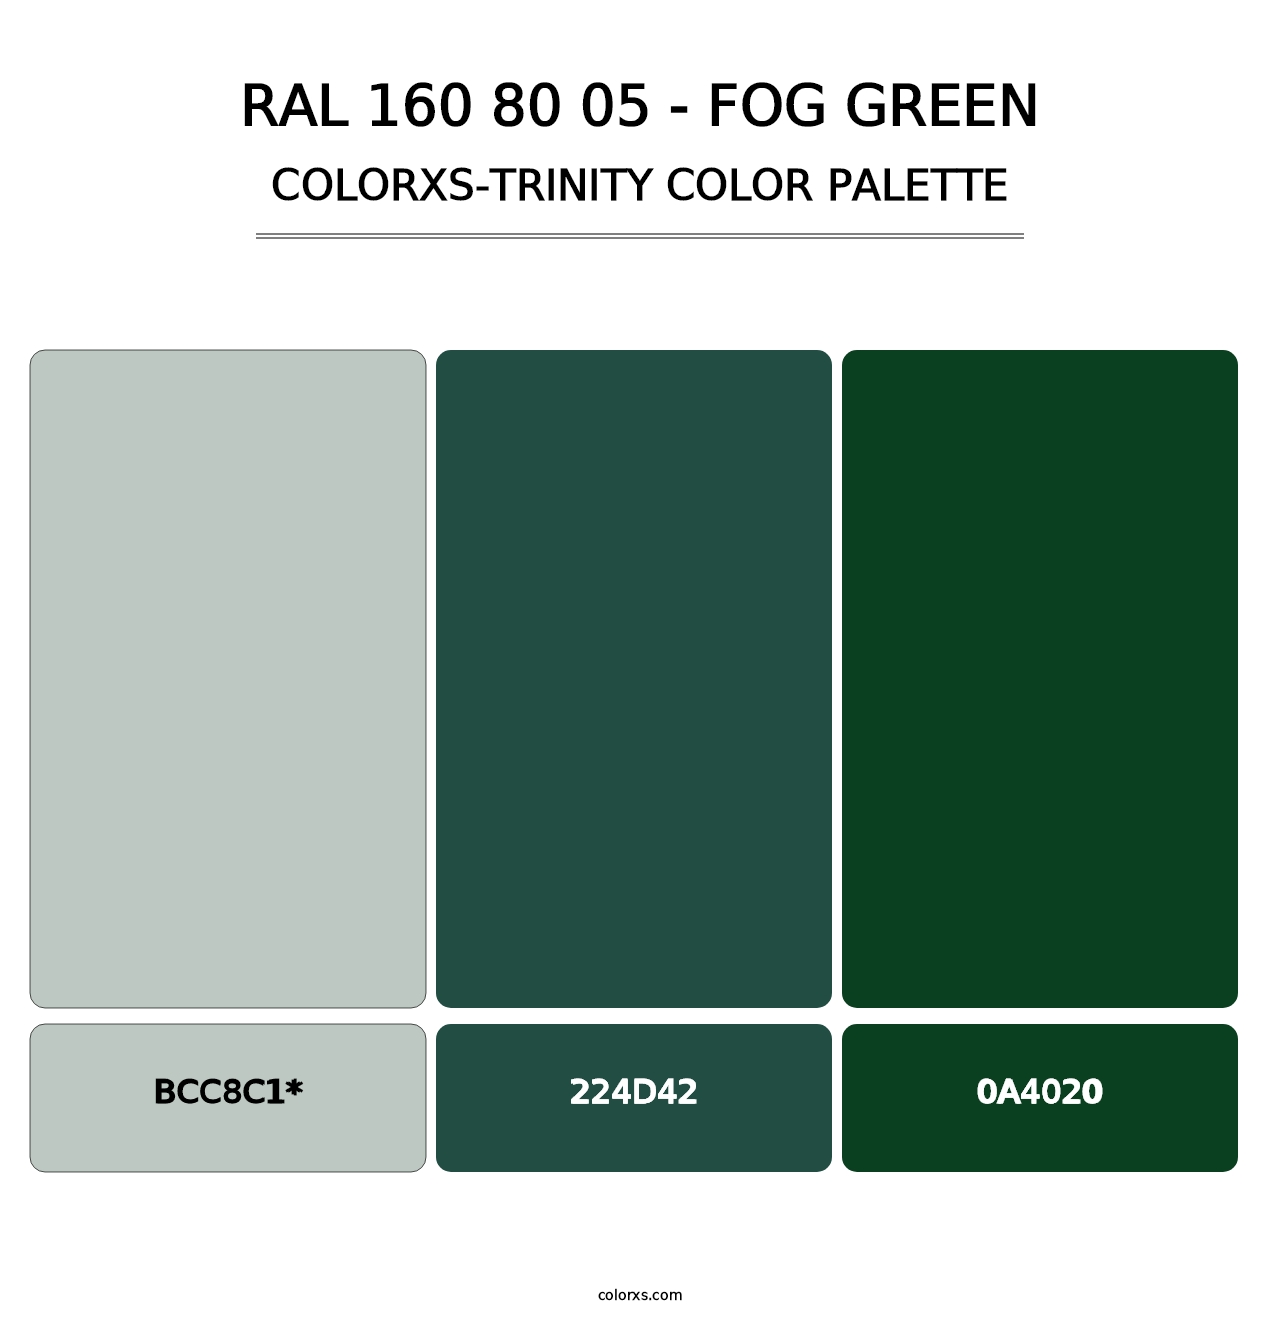 RAL 160 80 05 - Fog Green - Colorxs Trinity Palette